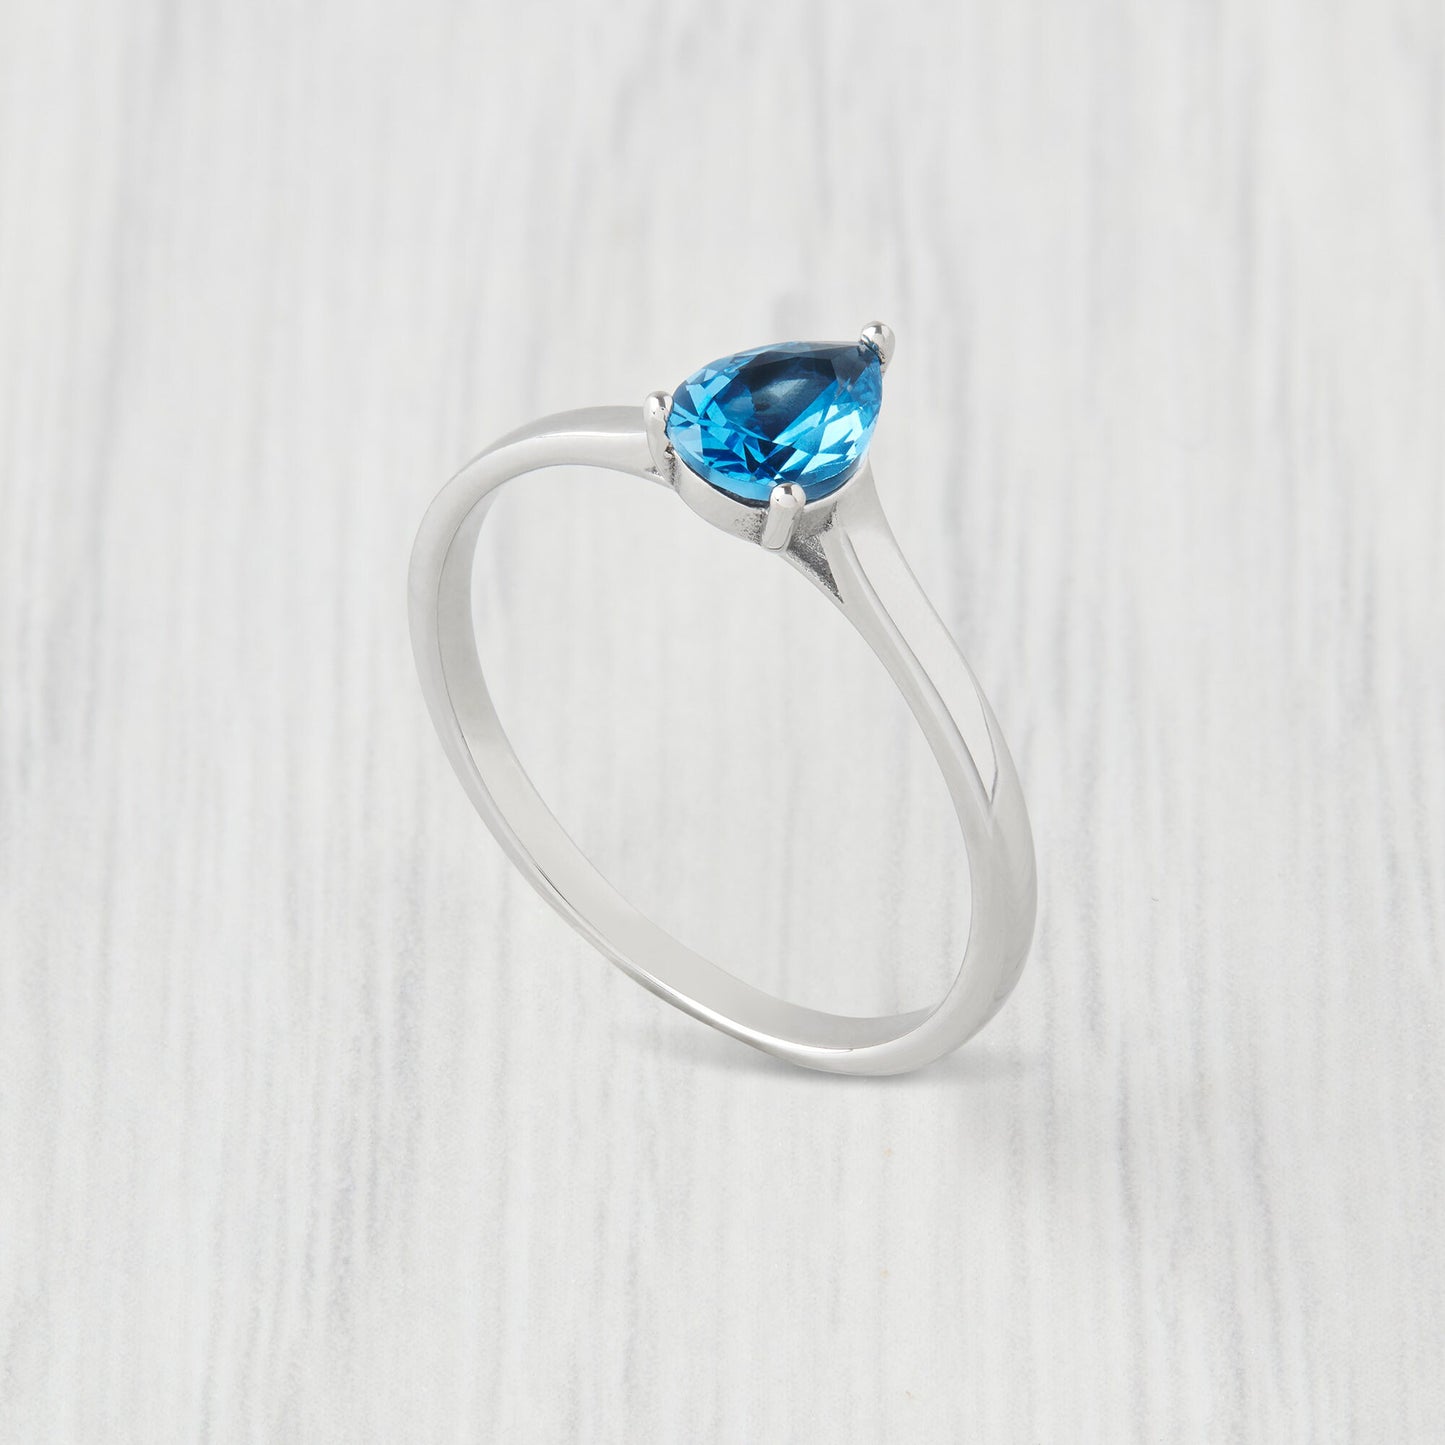 0.7ct Oval Cut natural blue topaz Solitaire cathedral ring in Titanium or White Gold